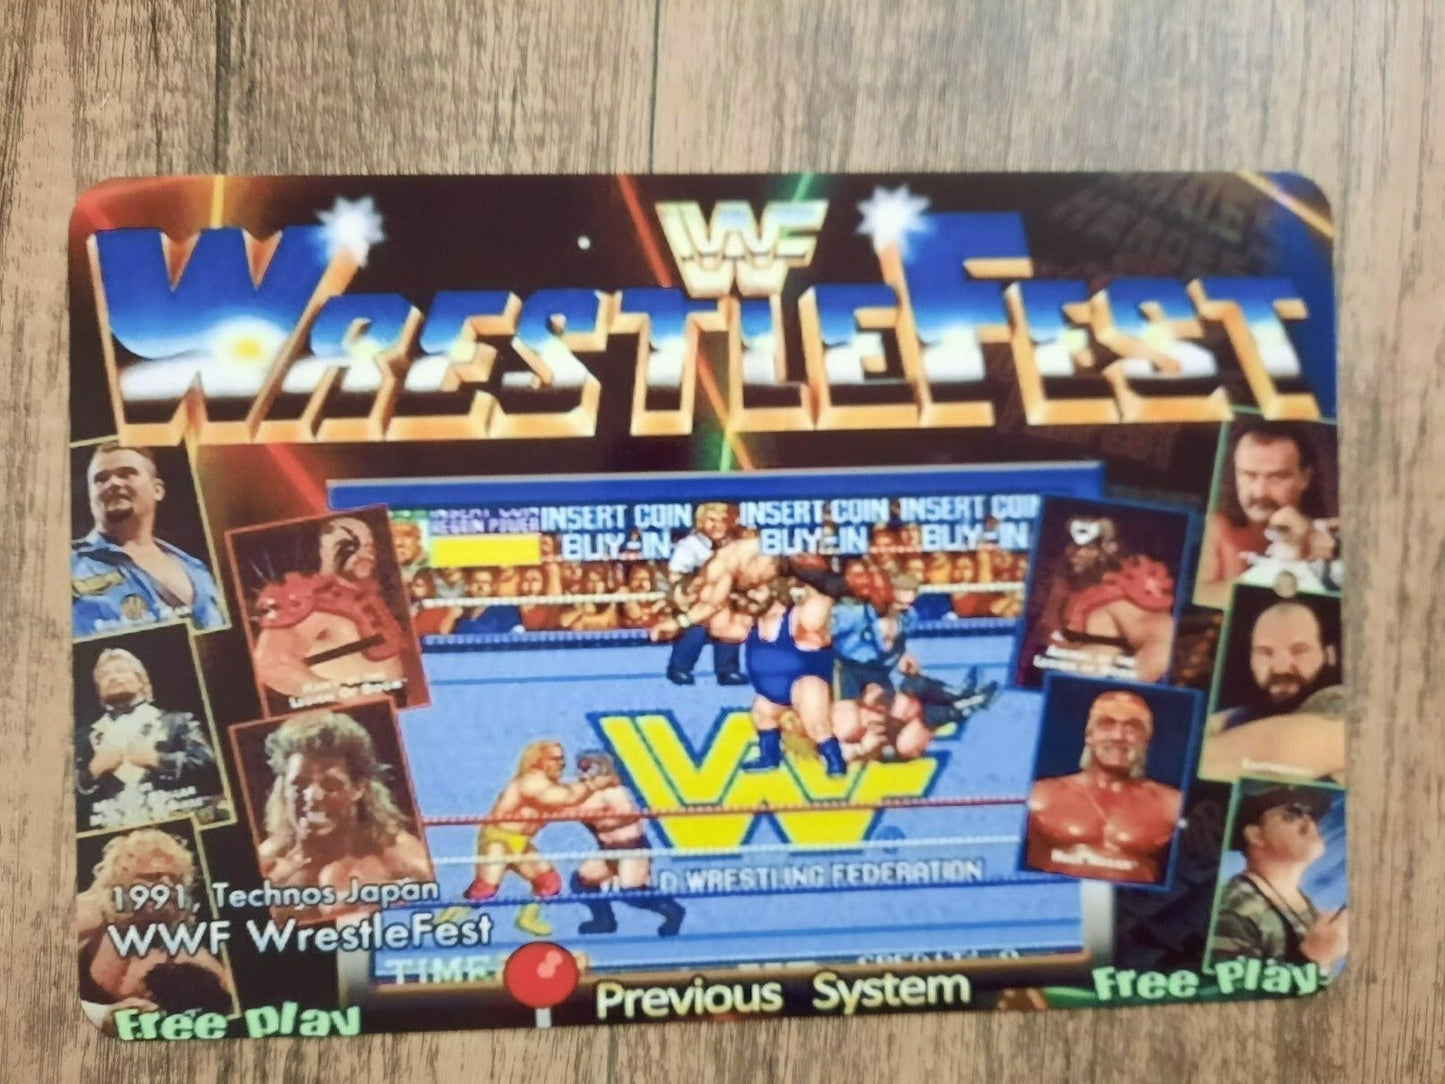 WWF Wrestlefest 8x12 Metal Wall Sign Classic Fighting Arcade Video Game